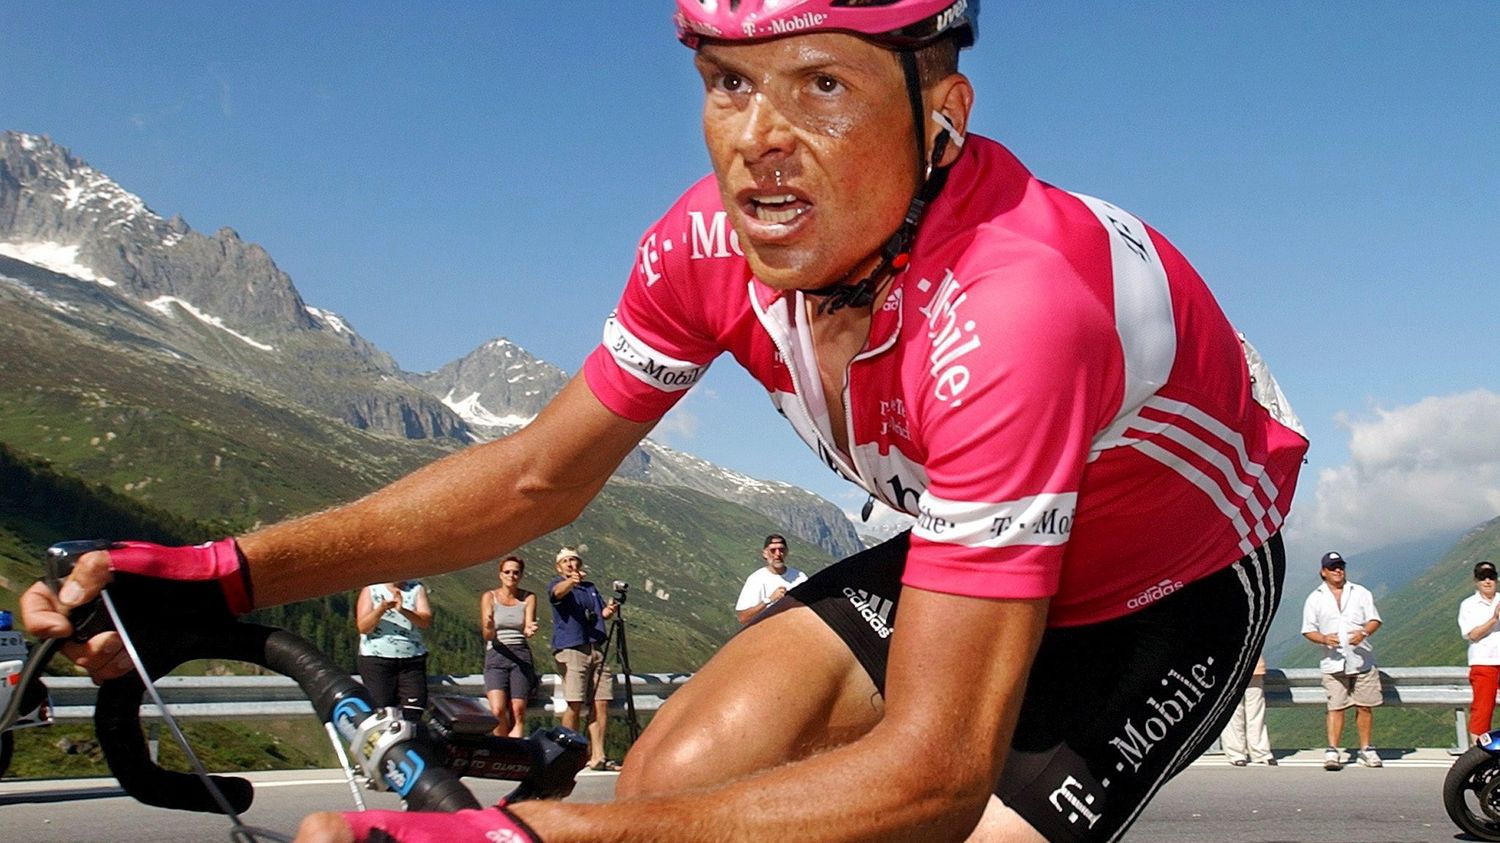 Cycling: "I won in the conditions of the time", says Jan Ullrich in the documentary about his doping cases and his descent into hell